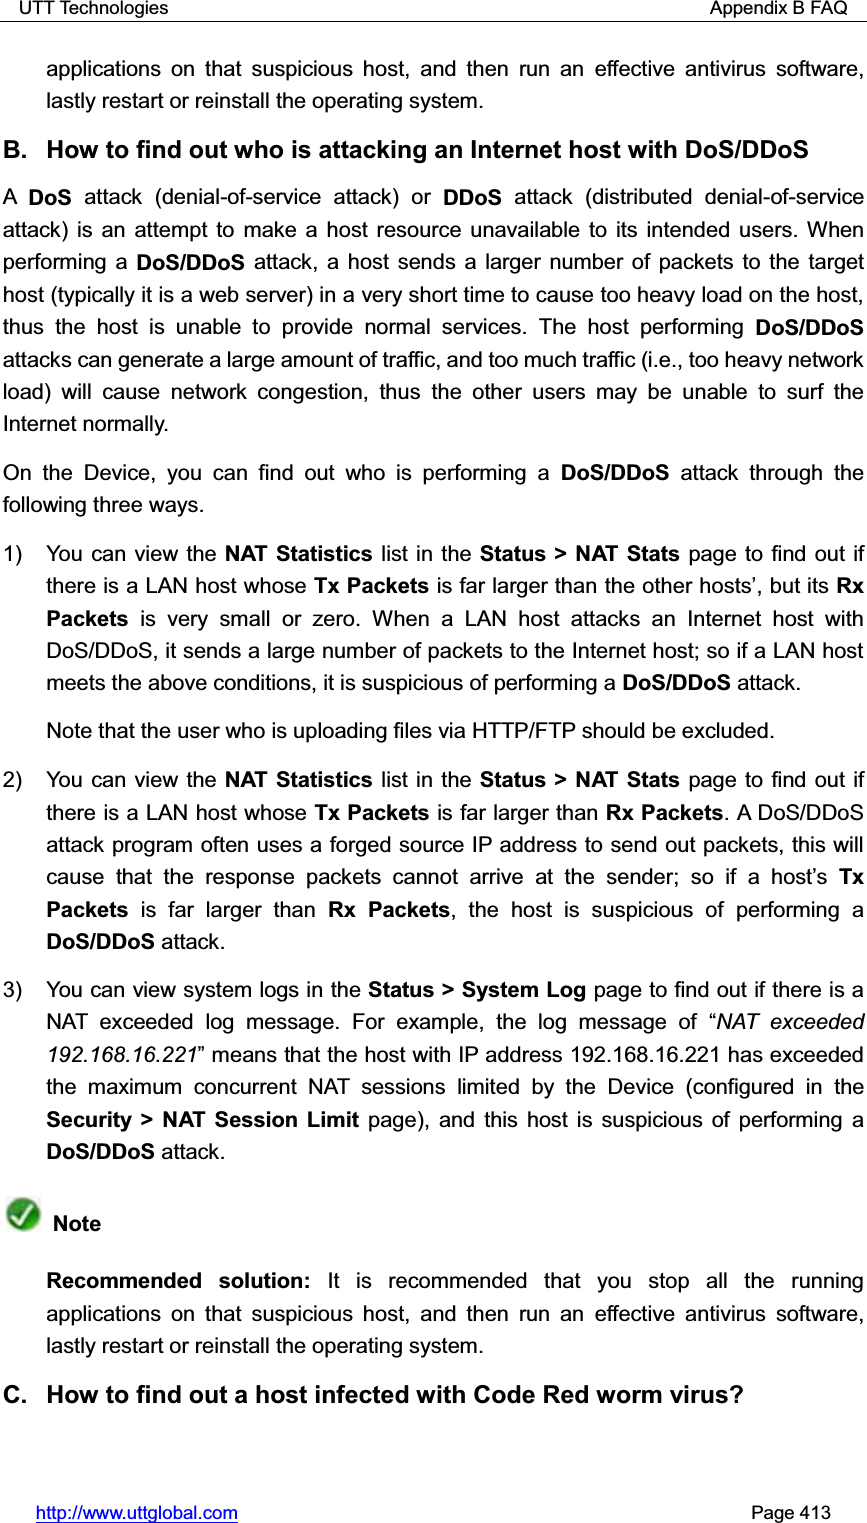 UTT Technologies                                                          Appendix B FAQ http://www.uttglobal.com                                                       Page 413 applications on that suspicious host, and then run an effective antivirus software, lastly restart or reinstall the operating system.   B.  How to find out who is attacking an Internet host with DoS/DDoS ADoS  attack (denial-of-service attack) or DDoS attack (distributed denial-of-service attack) is an attempt to make a host resource unavailable to its intended users. Whenperforming a DoS/DDoS attack, a host sends a larger number of packets to the target host (typically it is a web server) in a very short time to cause too heavy load on the host, thus the host is unable to provide normal services. The host performing DoS/DDoSattacks can generate a large amount of traffic, and too much traffic (i.e., too heavy network load) will cause network congestion, thus the other users may be unable to surf the Internet normally. On the Device, you can find out who is performing a DoS/DDoS attack through the following three ways. 1)  You can view the NAT Statistics list in the Status &gt; NAT Stats page to find out if there is a LAN host whose Tx Packets is far larger than the other hostV¶, but its Rx Packets is very small or zero. When a LAN host attacks an Internet host with DoS/DDoS, it sends a large number of packets to the Internet host; so if a LAN host meets the above conditions, it is suspicious of performing a DoS/DDoS attack. Note that the user who is uploading files via HTTP/FTP should be excluded. 2)  You can view the NAT Statistics list in the Status &gt; NAT Stats page to find out if there is a LAN host whose Tx Packets is far larger than Rx Packets. A DoS/DDoS attack program often uses a forged source IP address to send out packets, this will cause that the response packets cannot arrive at the sender; so if a host¶sTxPackets is far larger than Rx Packets, the host is suspicious of performing a DoS/DDoS attack. 3)  You can view system logs in the Status &gt; System Log page to find out if there is a NAT exceeded log message. For example, the log message of ³NAT exceeded 192.168.16.221´ means that the host with IP address 192.168.16.221 has exceeded the maximum concurrent NAT sessions limited by the Device (configured in theSecurity &gt; NAT Session Limit page), and this host is suspicious of performing a DoS/DDoS attack.   Note Recommended solution: It is recommended that you stop all the running applications on that suspicious host, and then run an effective antivirus software, lastly restart or reinstall the operating system. C.  How to find out a host infected with Code Red worm virus? 